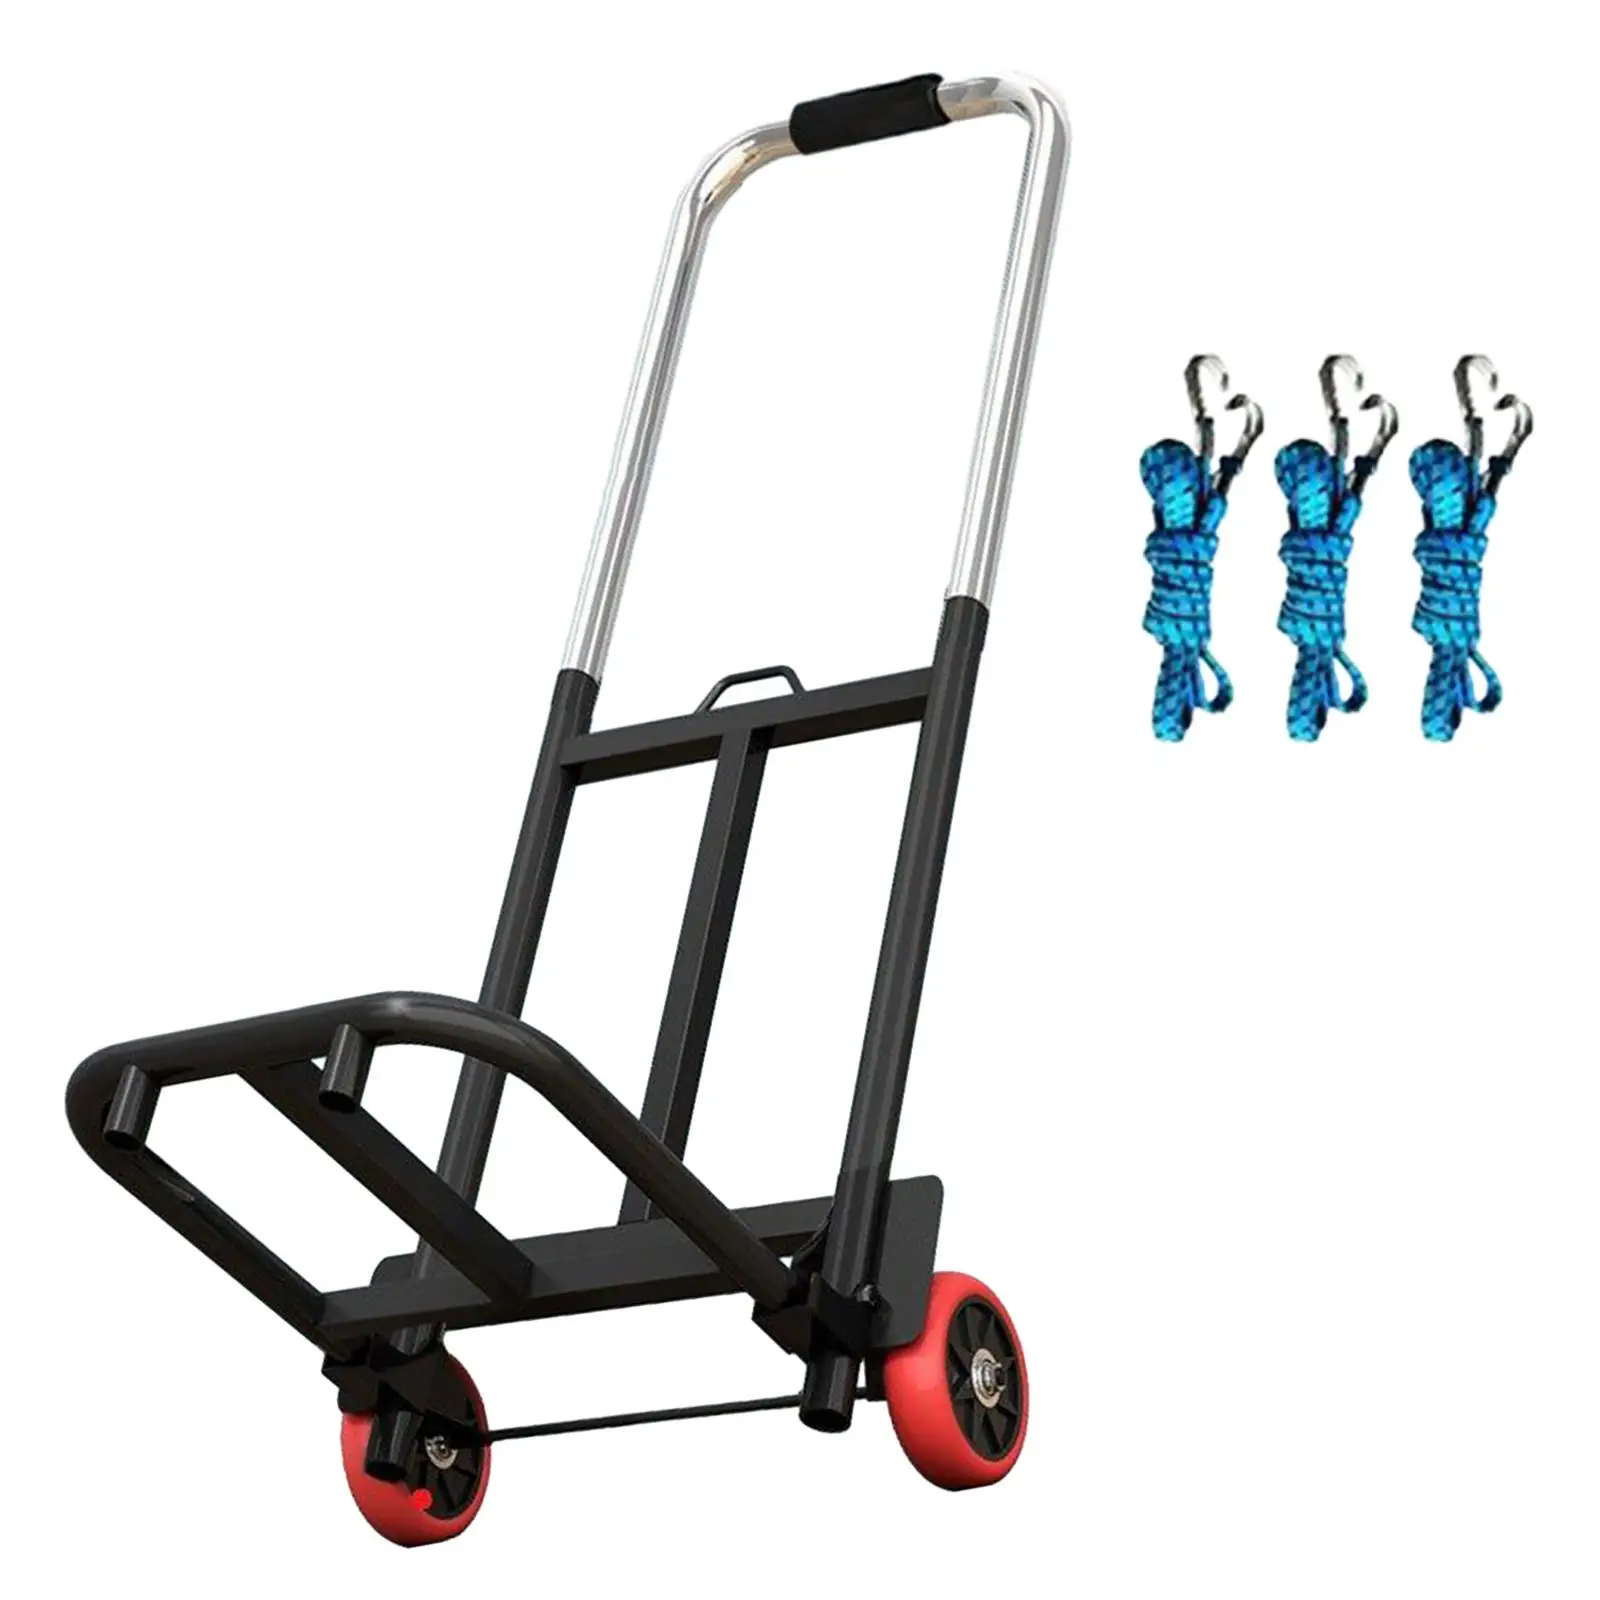 Foldable Hand Truck Luggage Hand Cart Sturdy Telescopic 50cm-80cm Adjustable Handle with 3 Elastic Ropes for Personal Travel